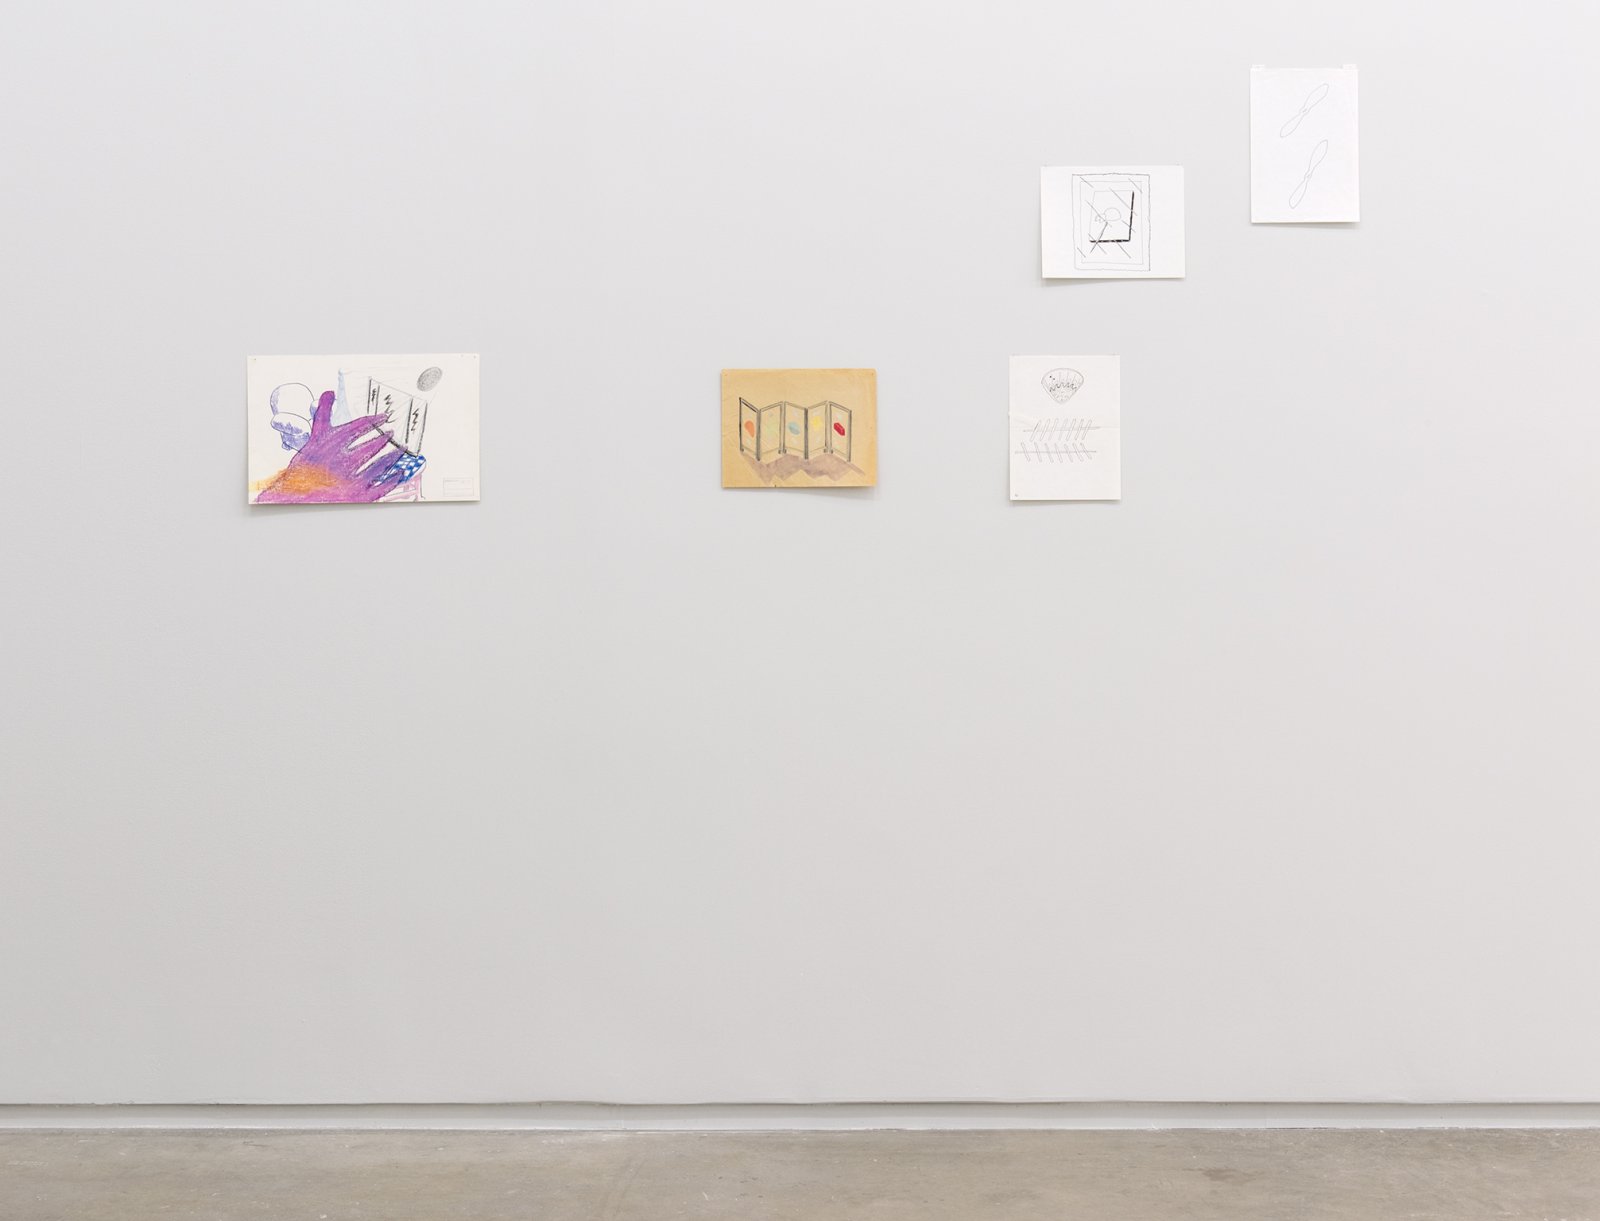 Jerry Pethick, installation view, Where sidewalks leap on the table, Catriona Jeffries, 2014  by Jerry Pethick